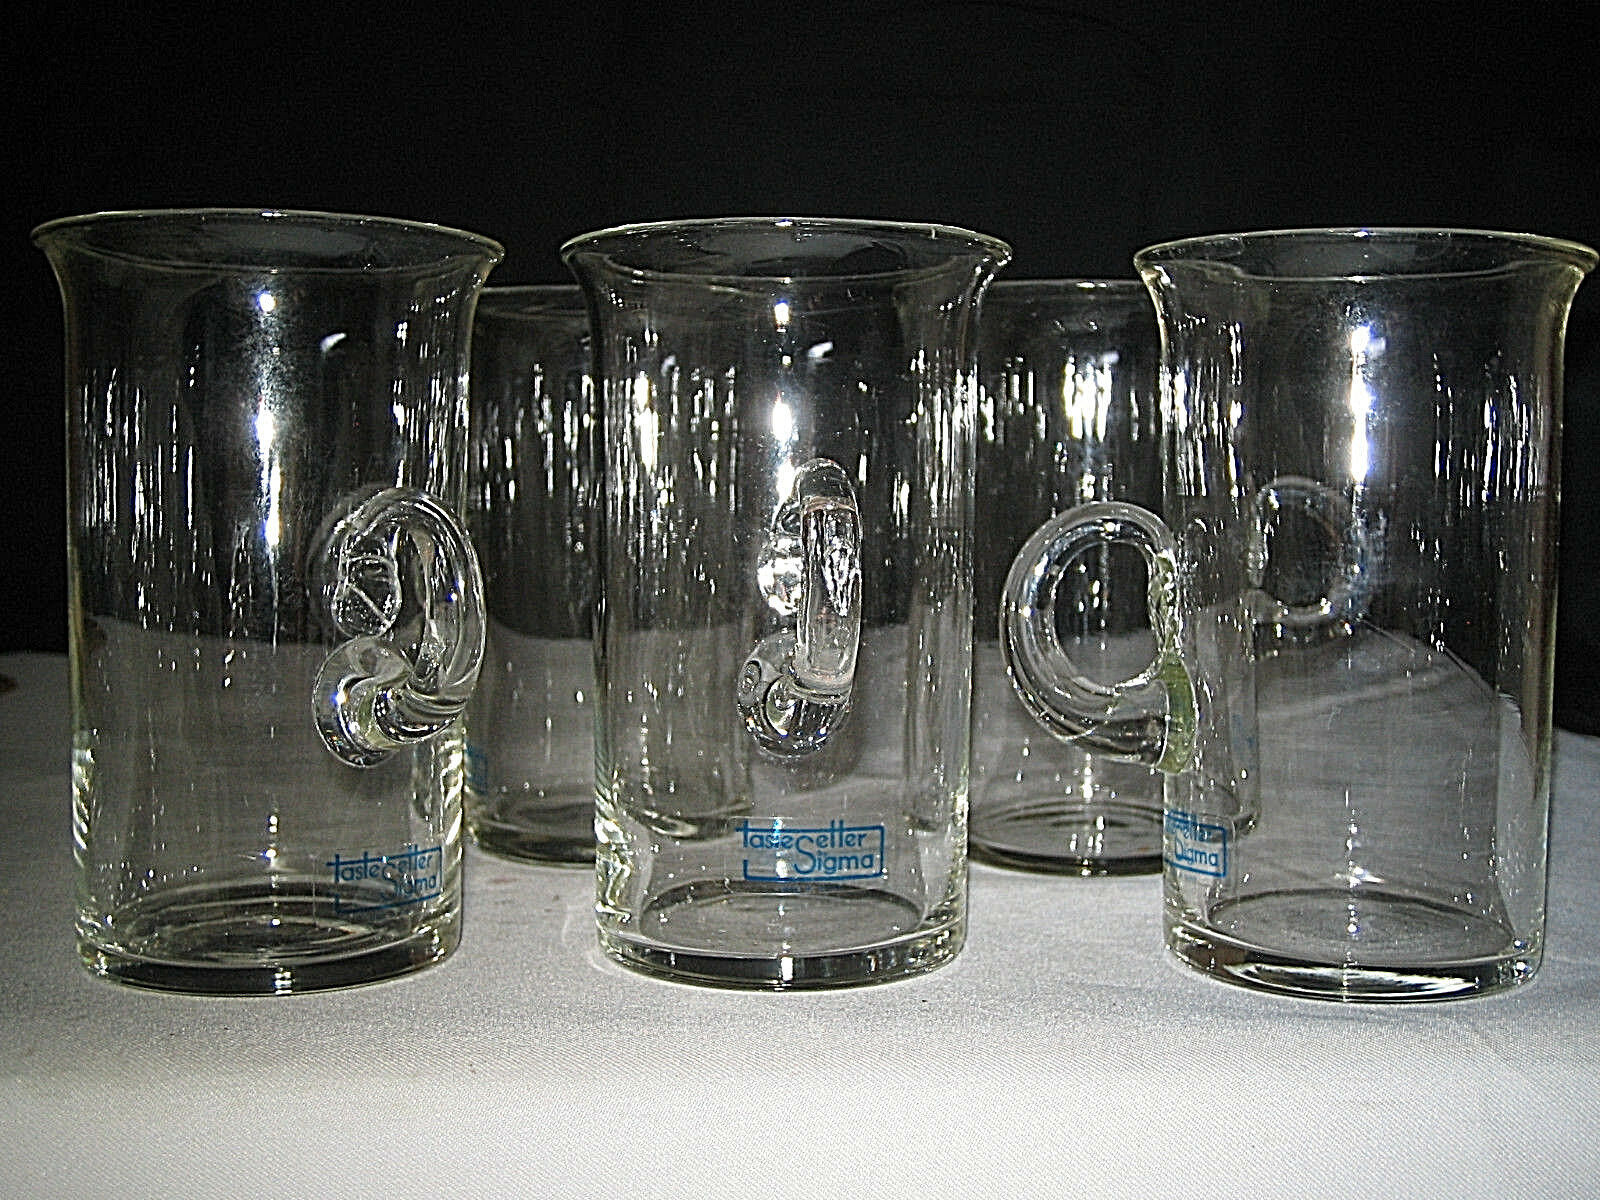 Primary image for 5 TASTER SETTER SIGMA IRISH COFFEE MUGS CUPS NEVER USED W/ FACTORY LABELS